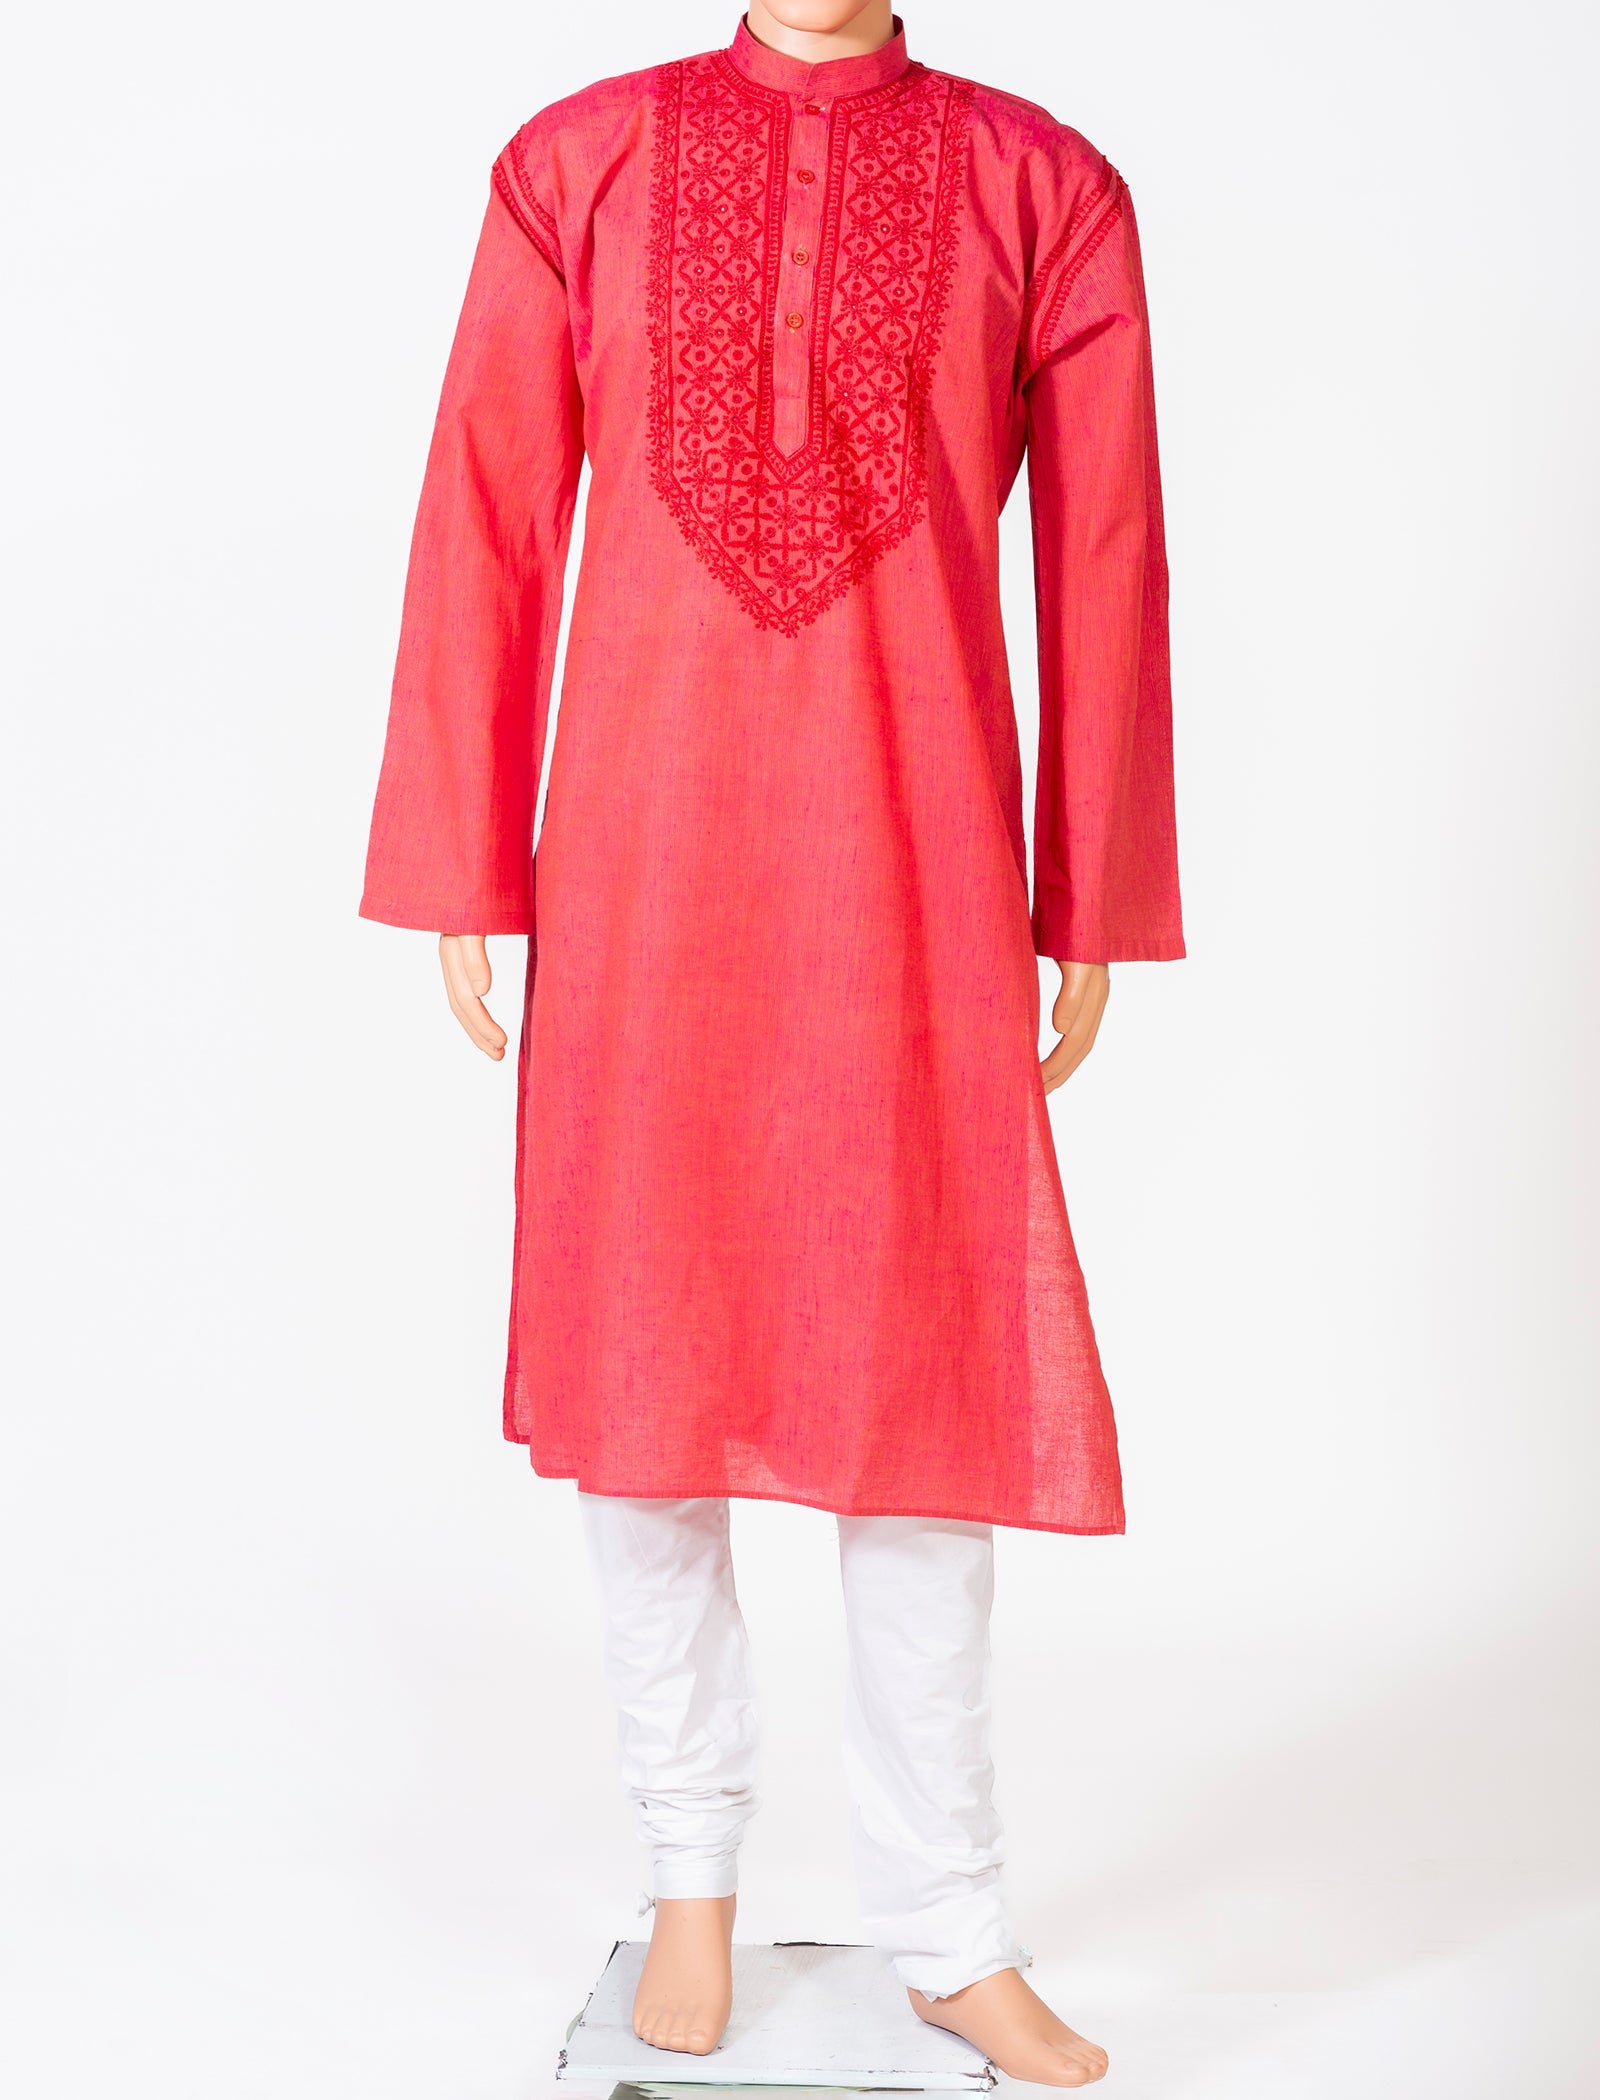 Lucknow Chikan Emporium Cotton Red Colour Gents Kurta With Self Stripes And Fancy Hand Chikankari On Neck.